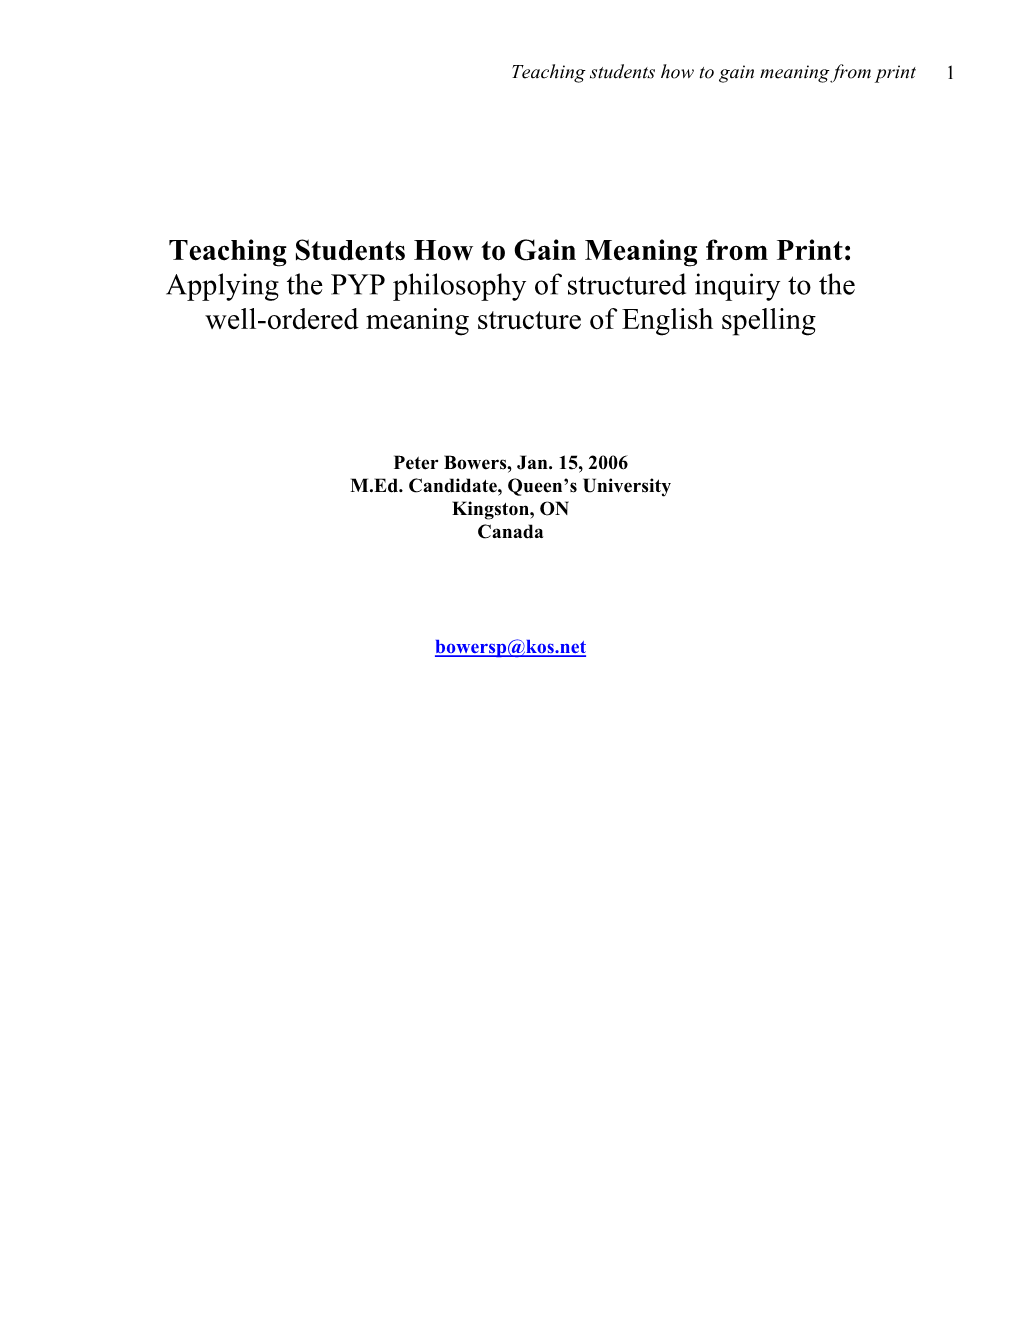 Bringing Structured Inquiry to English Orthography